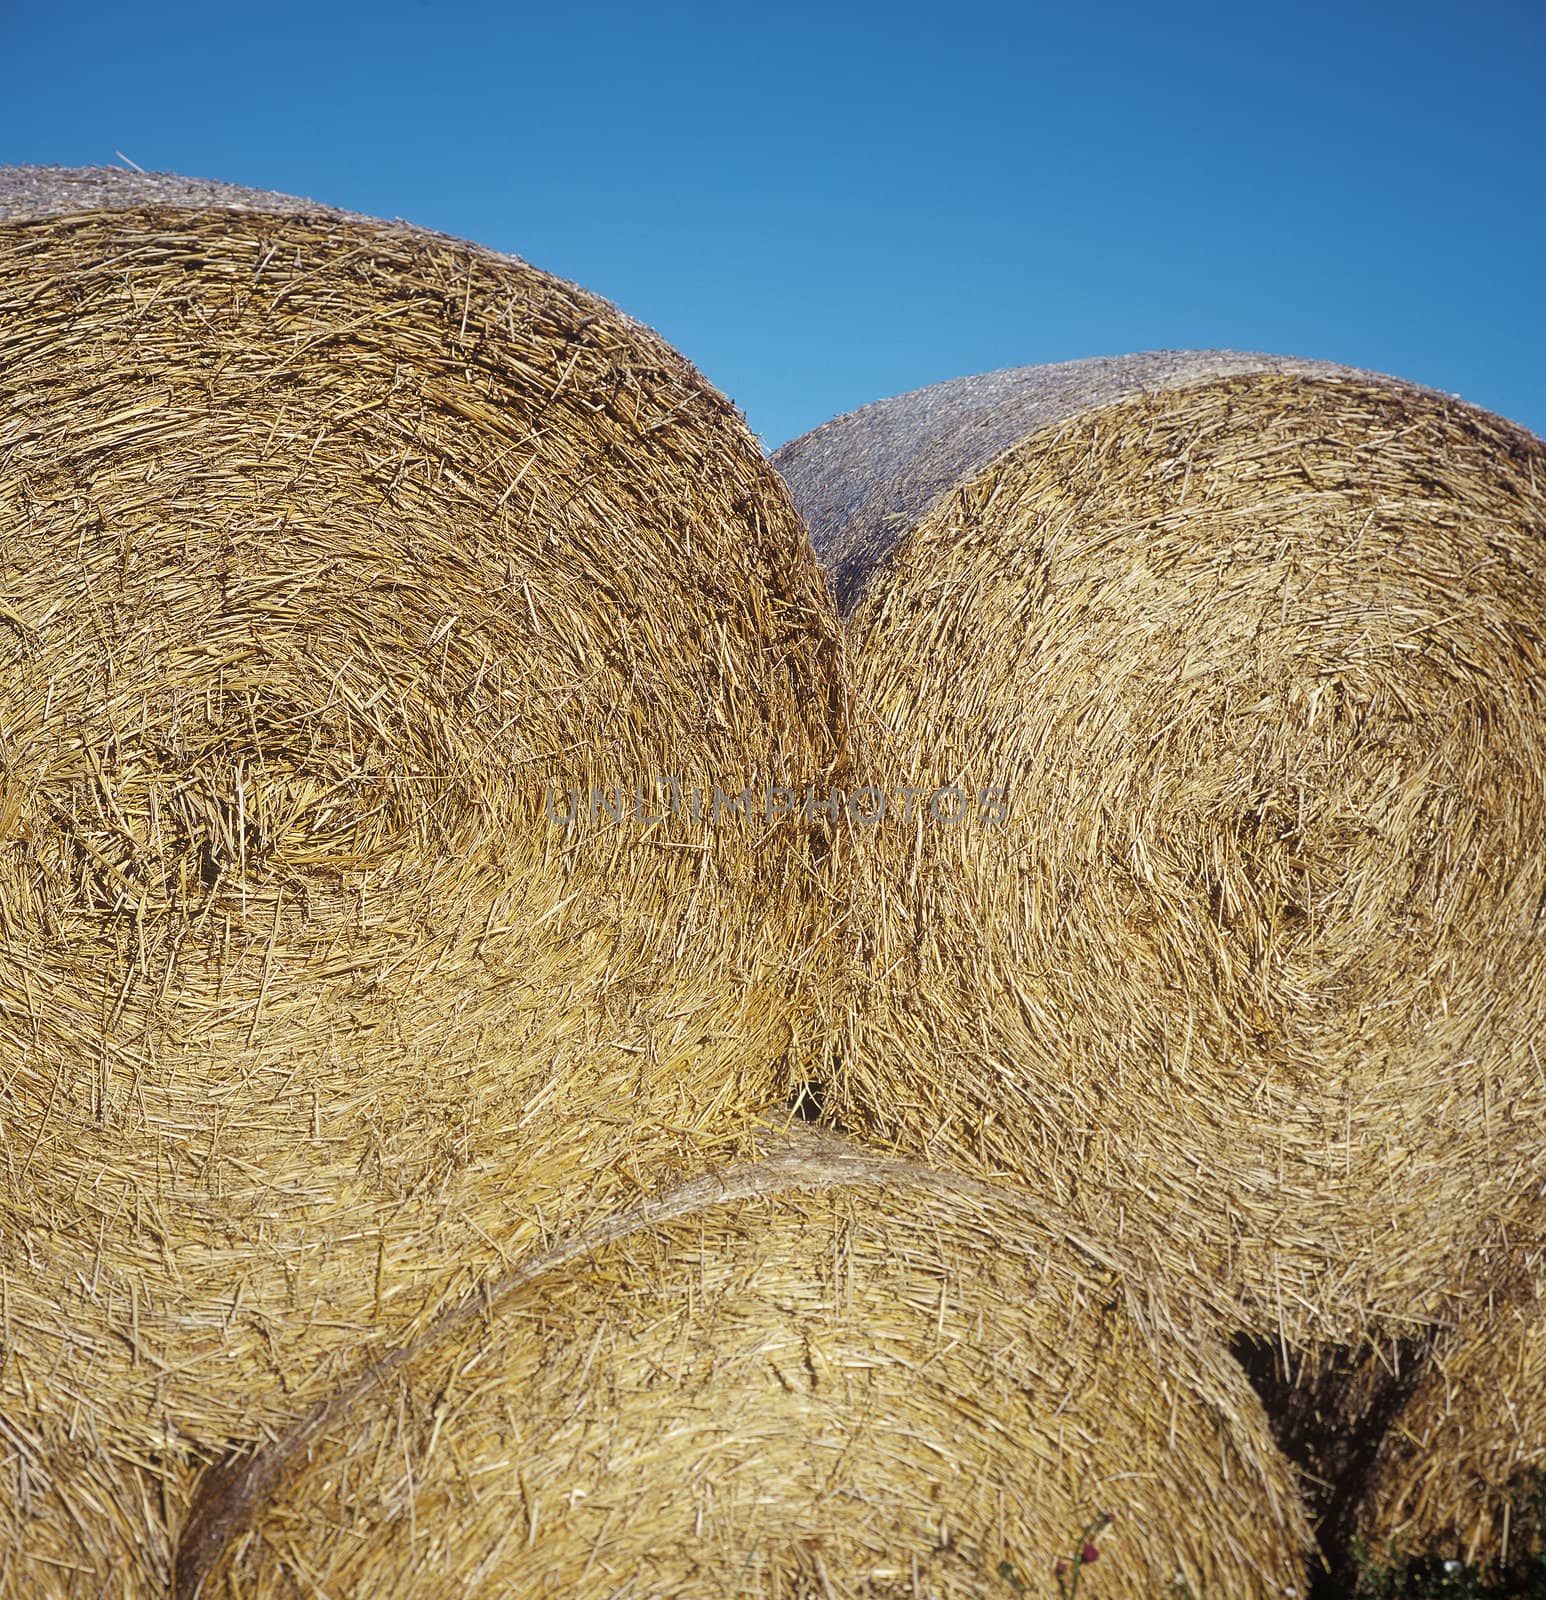 Close up of a pile of Hay stacks